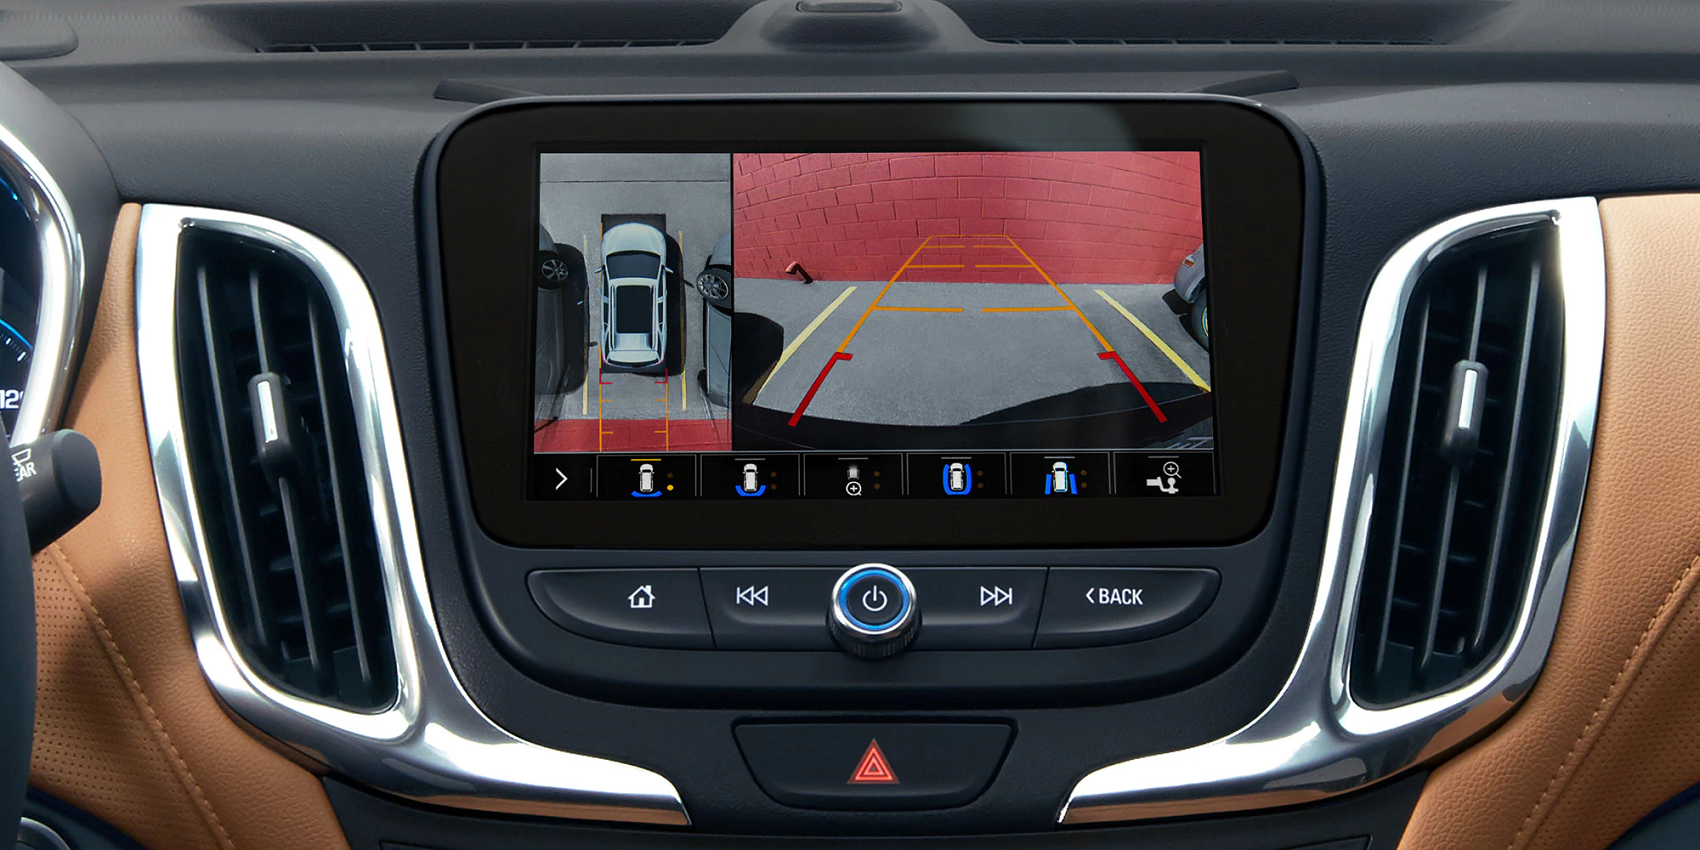 Safety Tech in the 2021 Equinox